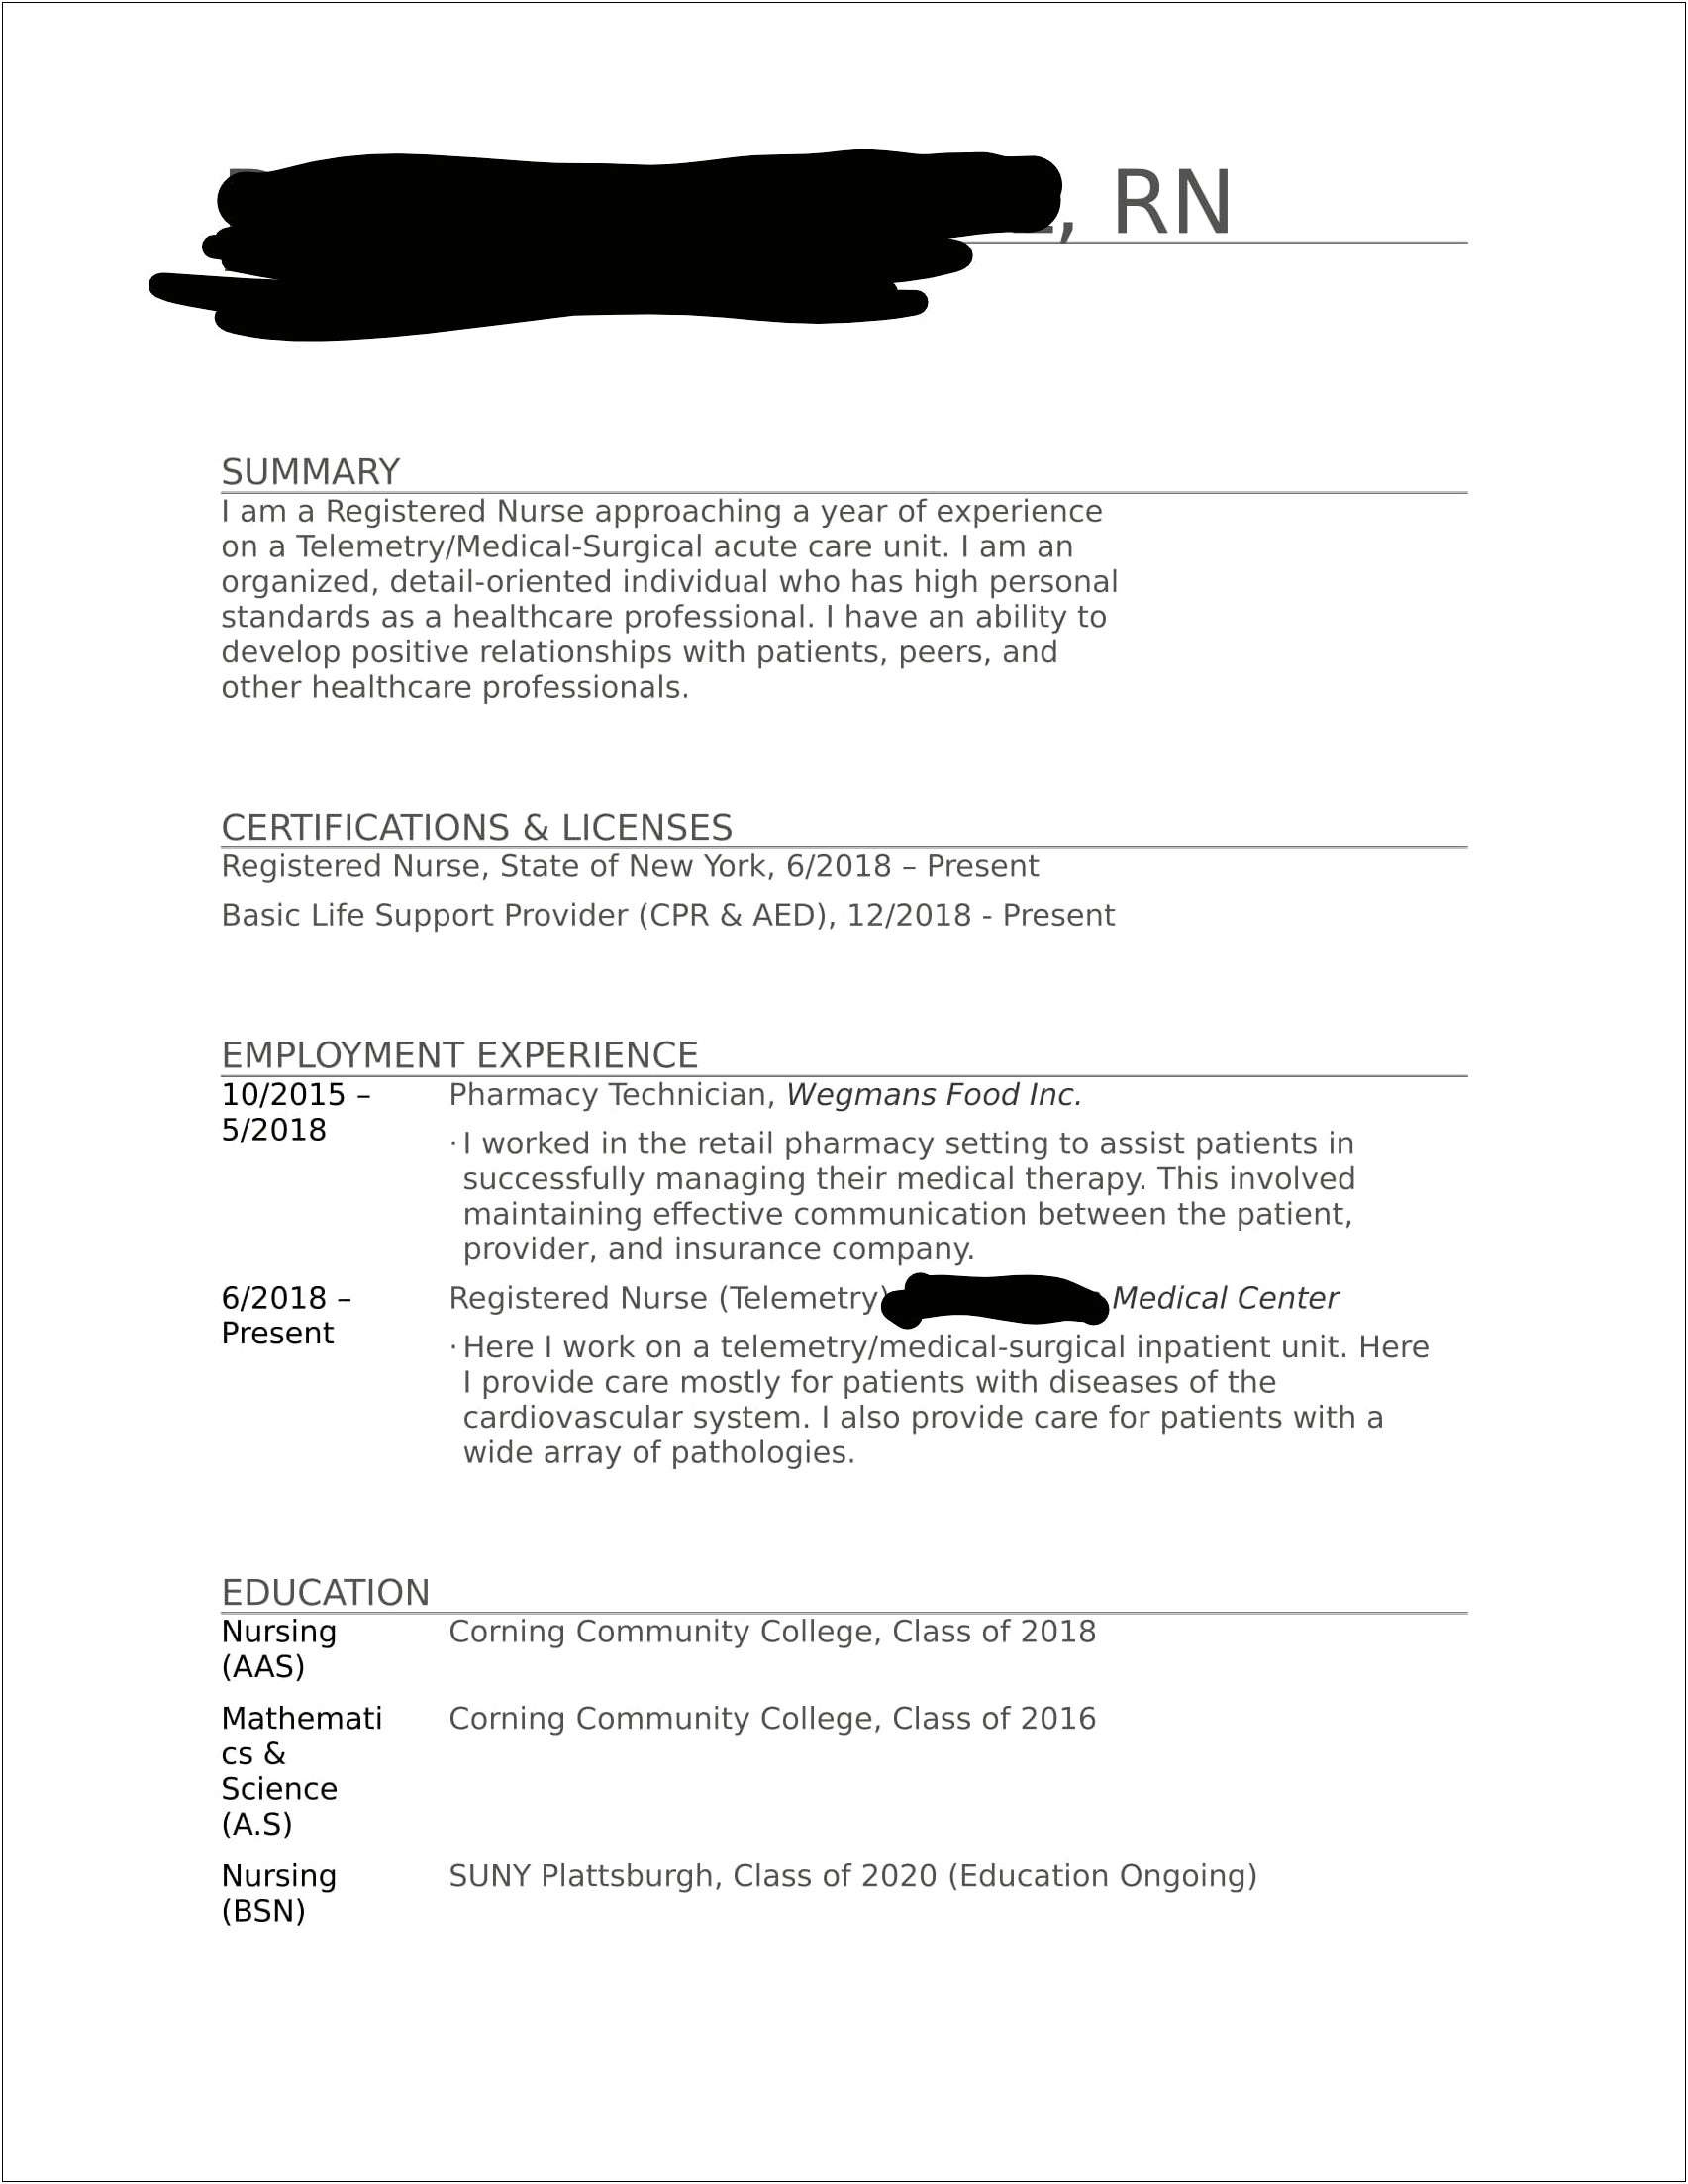 Resume For Nurse With One Year Experience